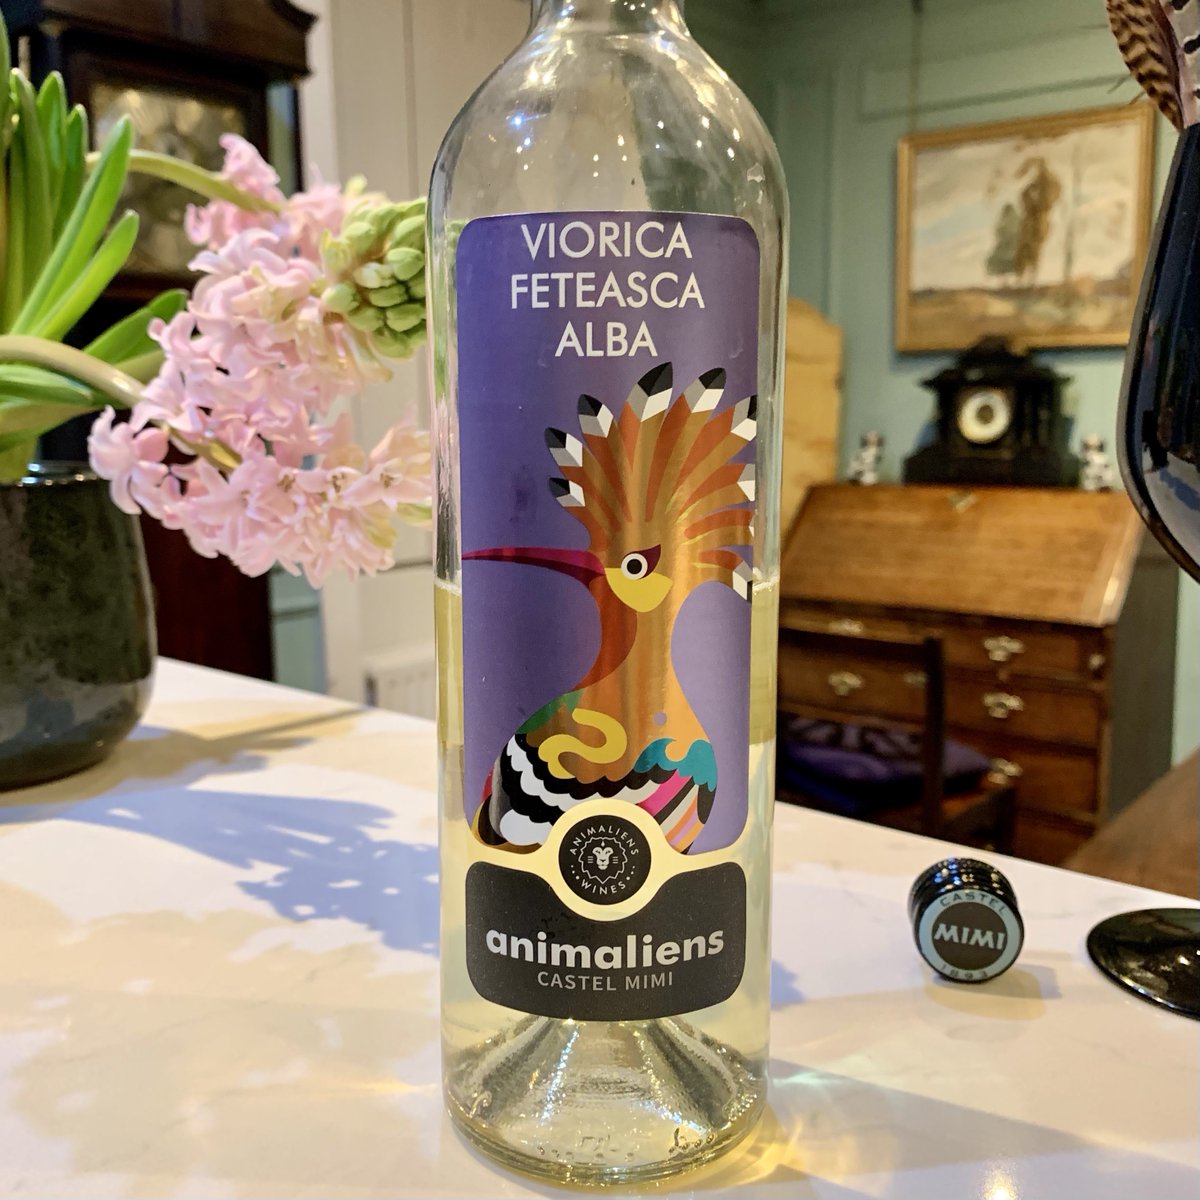 The more Moldovan wines I taste, the more I realise I don't taste enough of them, especially from indigenous grapes. This white blend of Viorica and Feteasca Alba @CastelMimiWines is my new #wineoftheweek joannasimon.com/post/wine-of-t… #Moldova @TannersWines